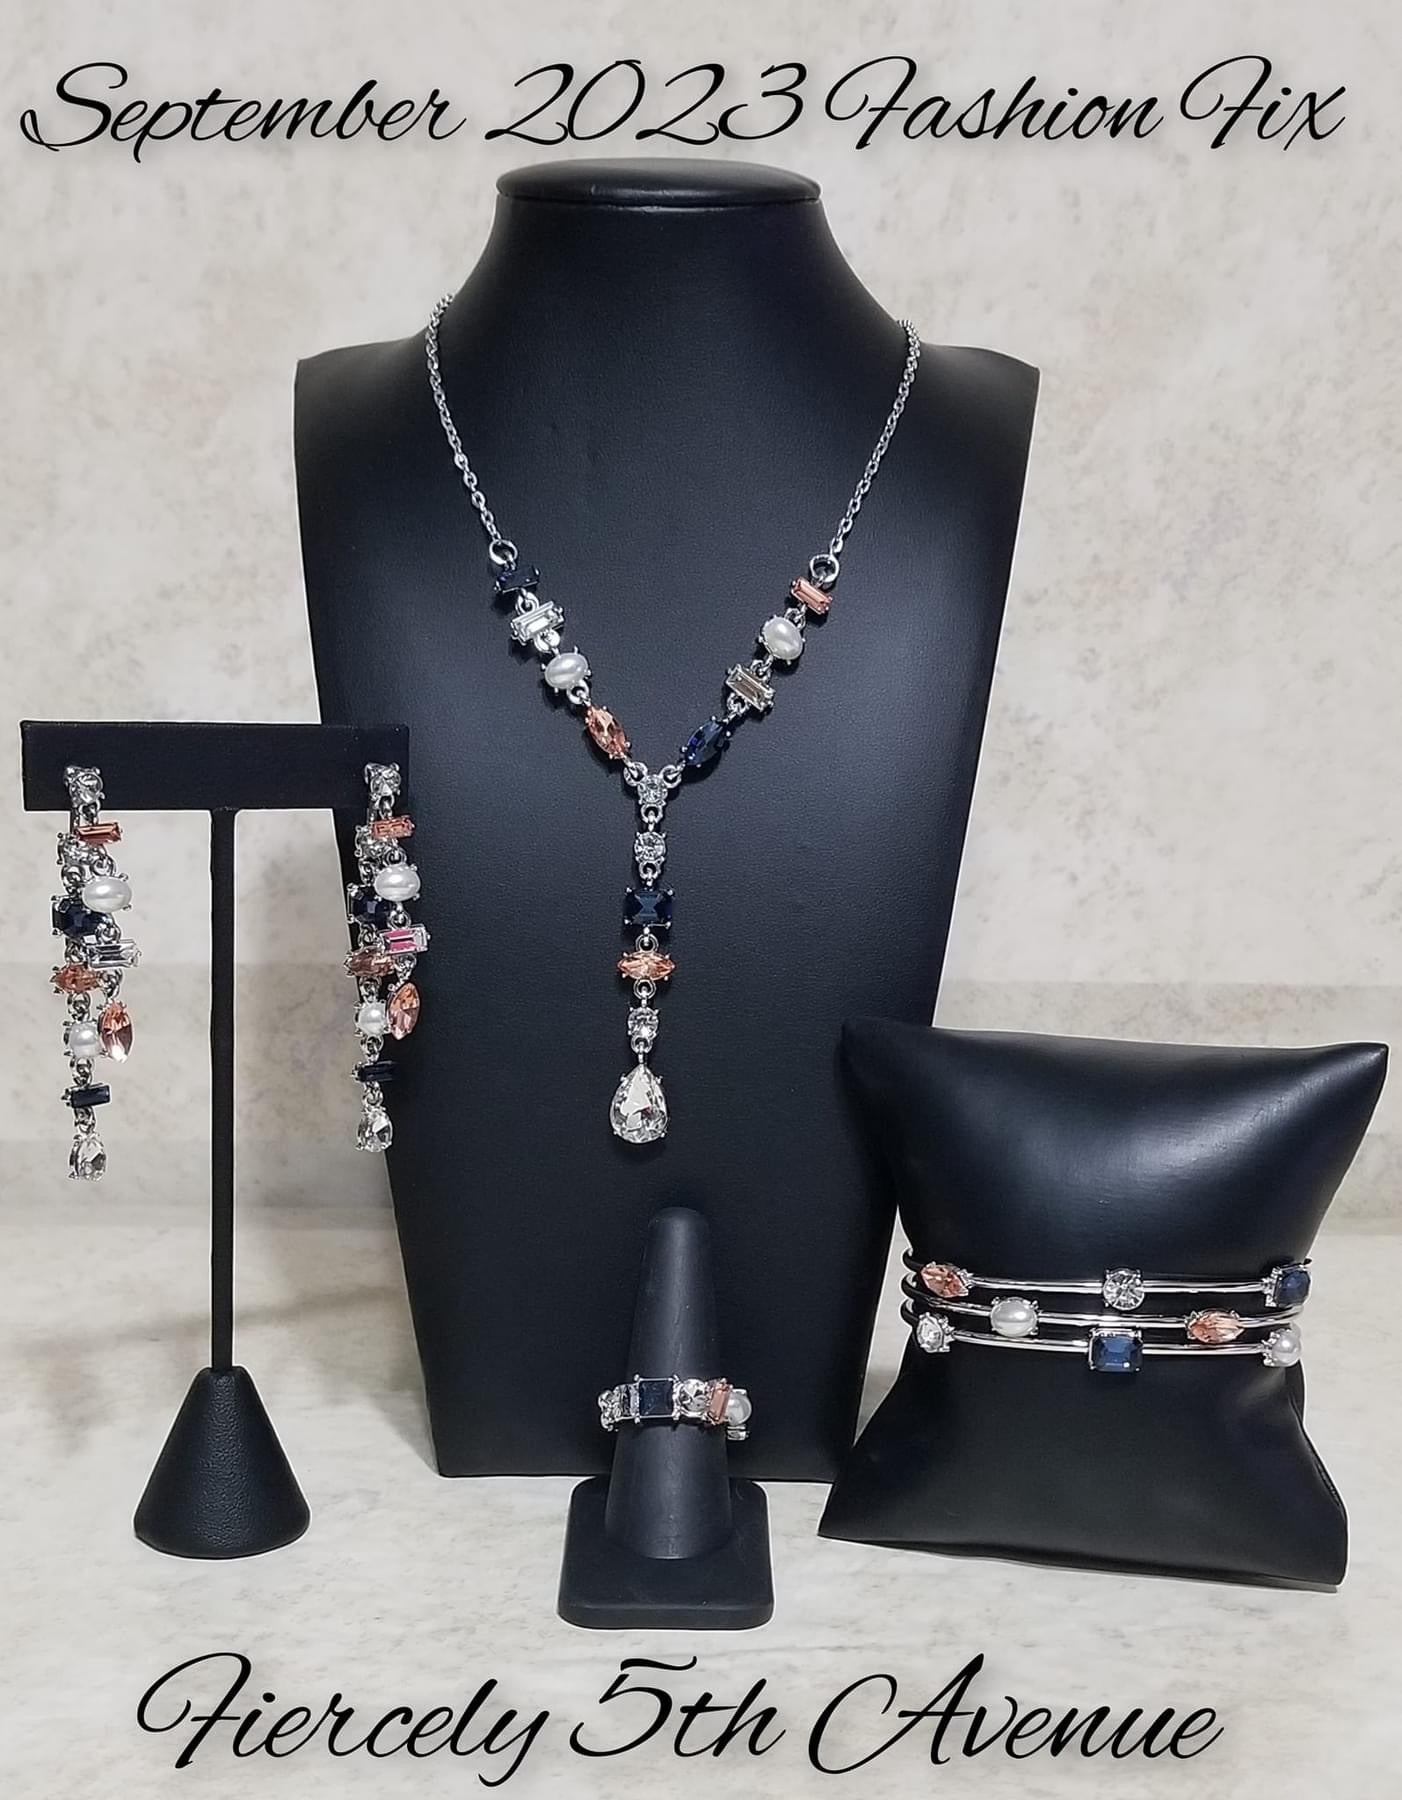 Paparazzi Accessories Fiercely 5th Avenue - Complete Trend Blend - September 2023 Timeless and classic yet sophisticated and versatile, the Fiercely 5th Avenue Collection features elegant designs and traditional metal finishes. Never one to shy away from